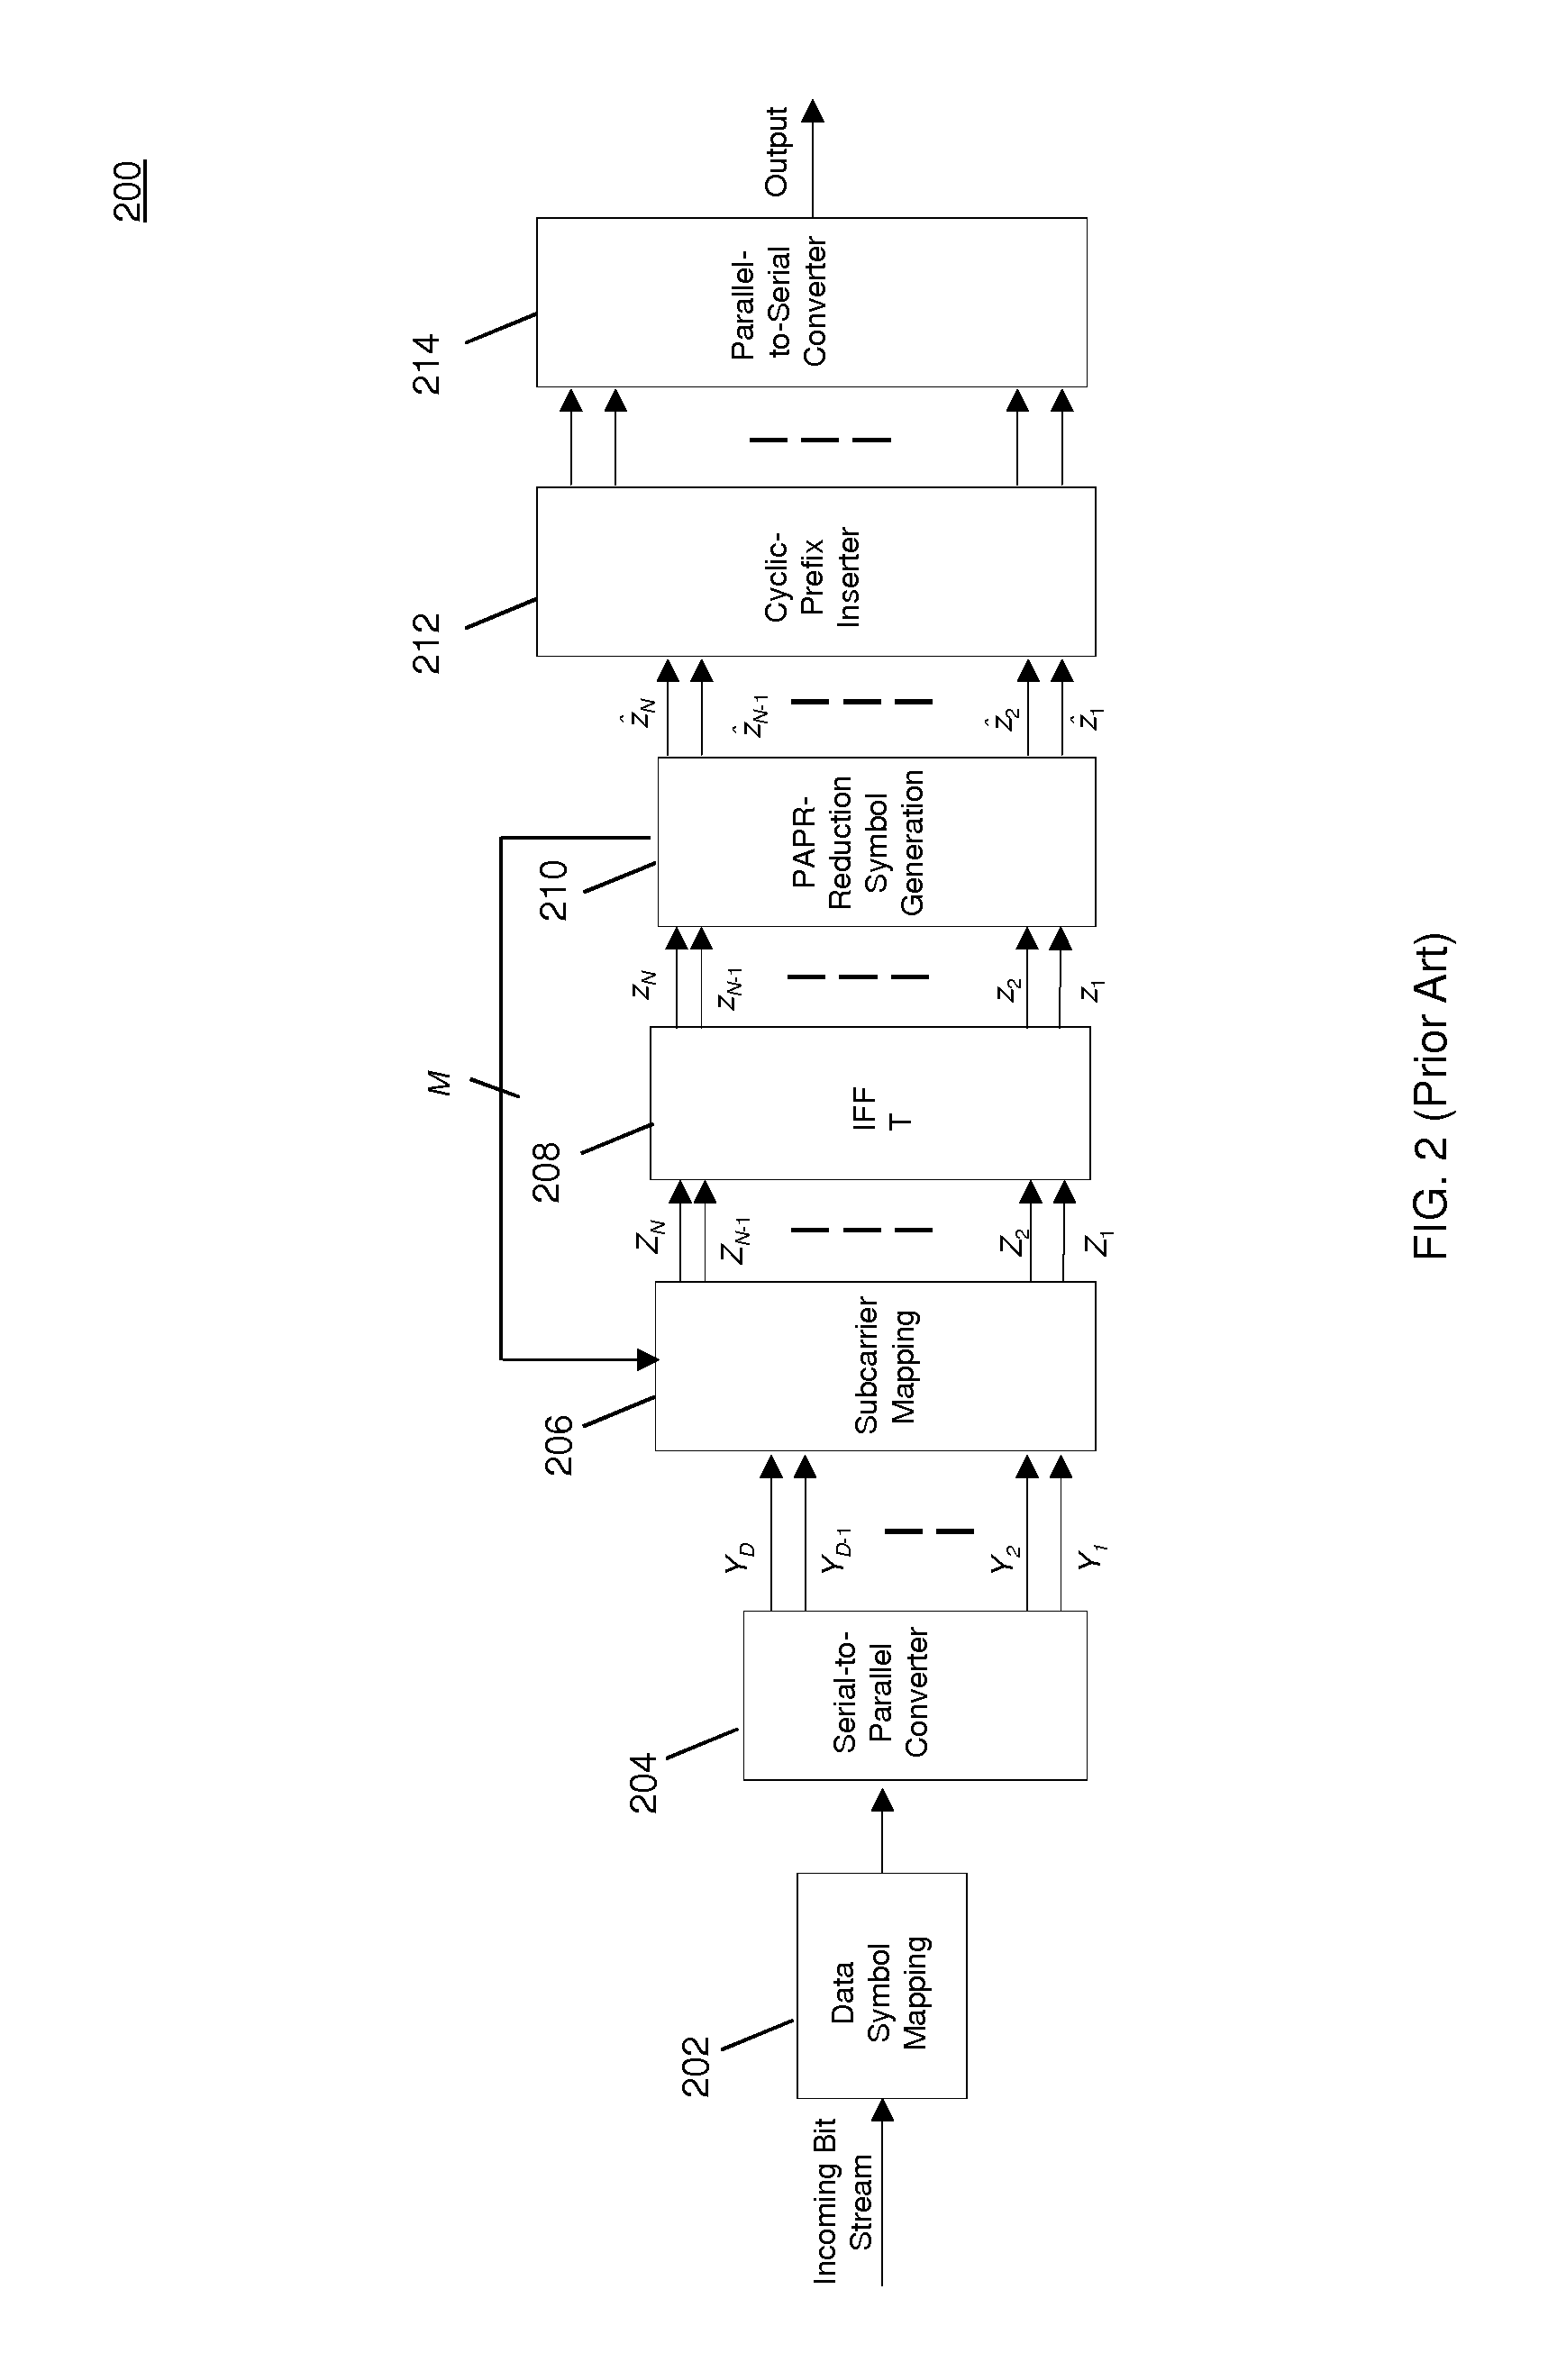 Dynamically selecting methods to reduce distortion in multi-carrier modulated signals resulting from high peak-to-average power ratios